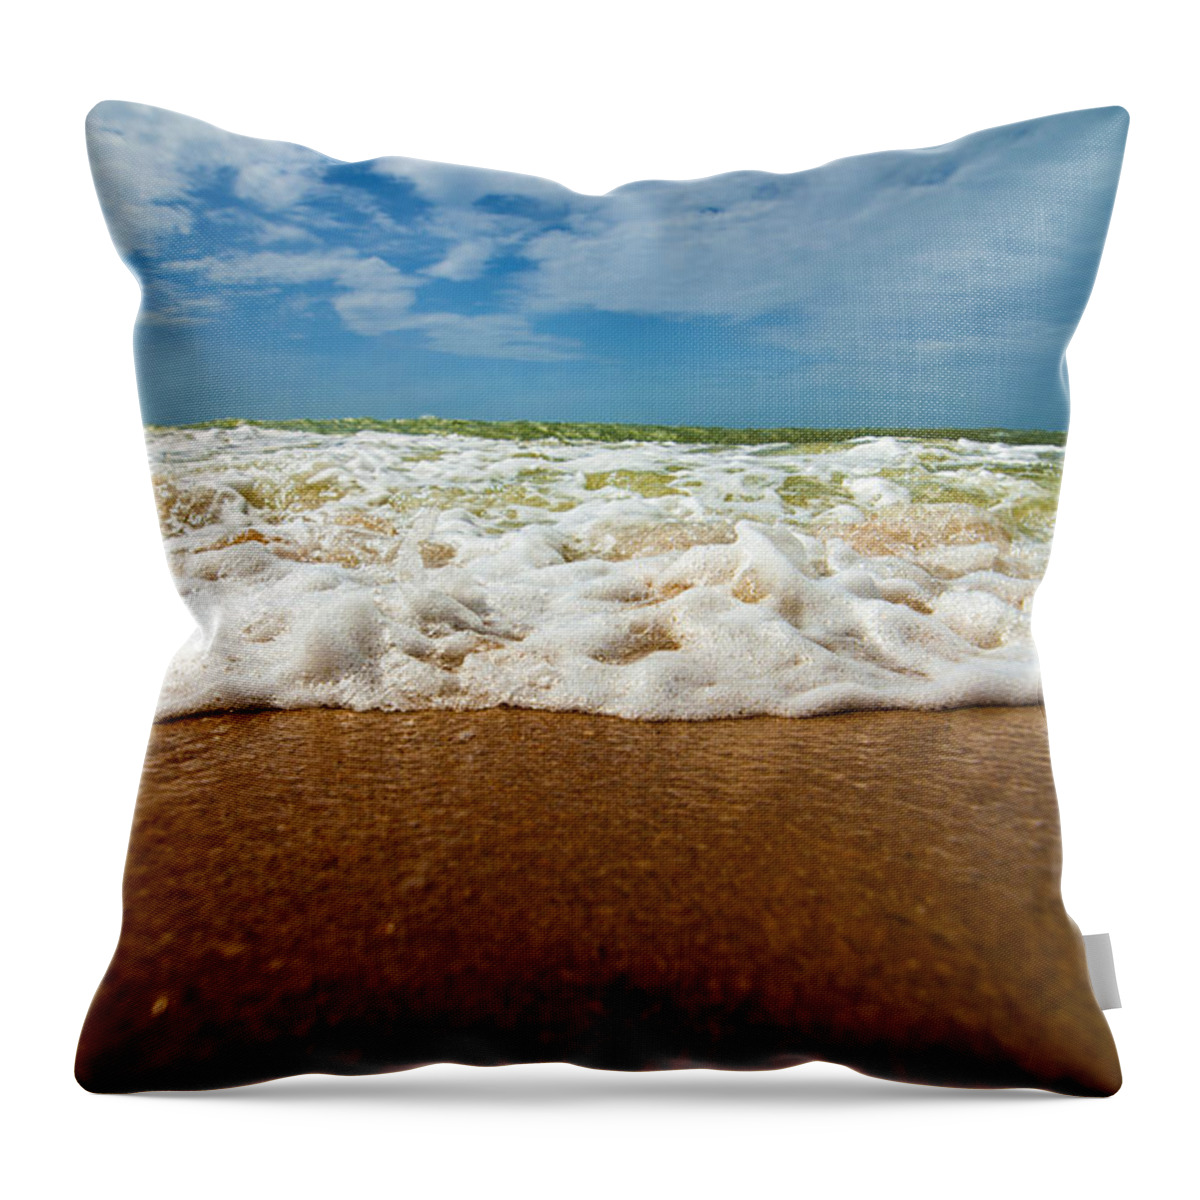 Sea Throw Pillow featuring the photograph Caribbean Waves by Jess Kraft